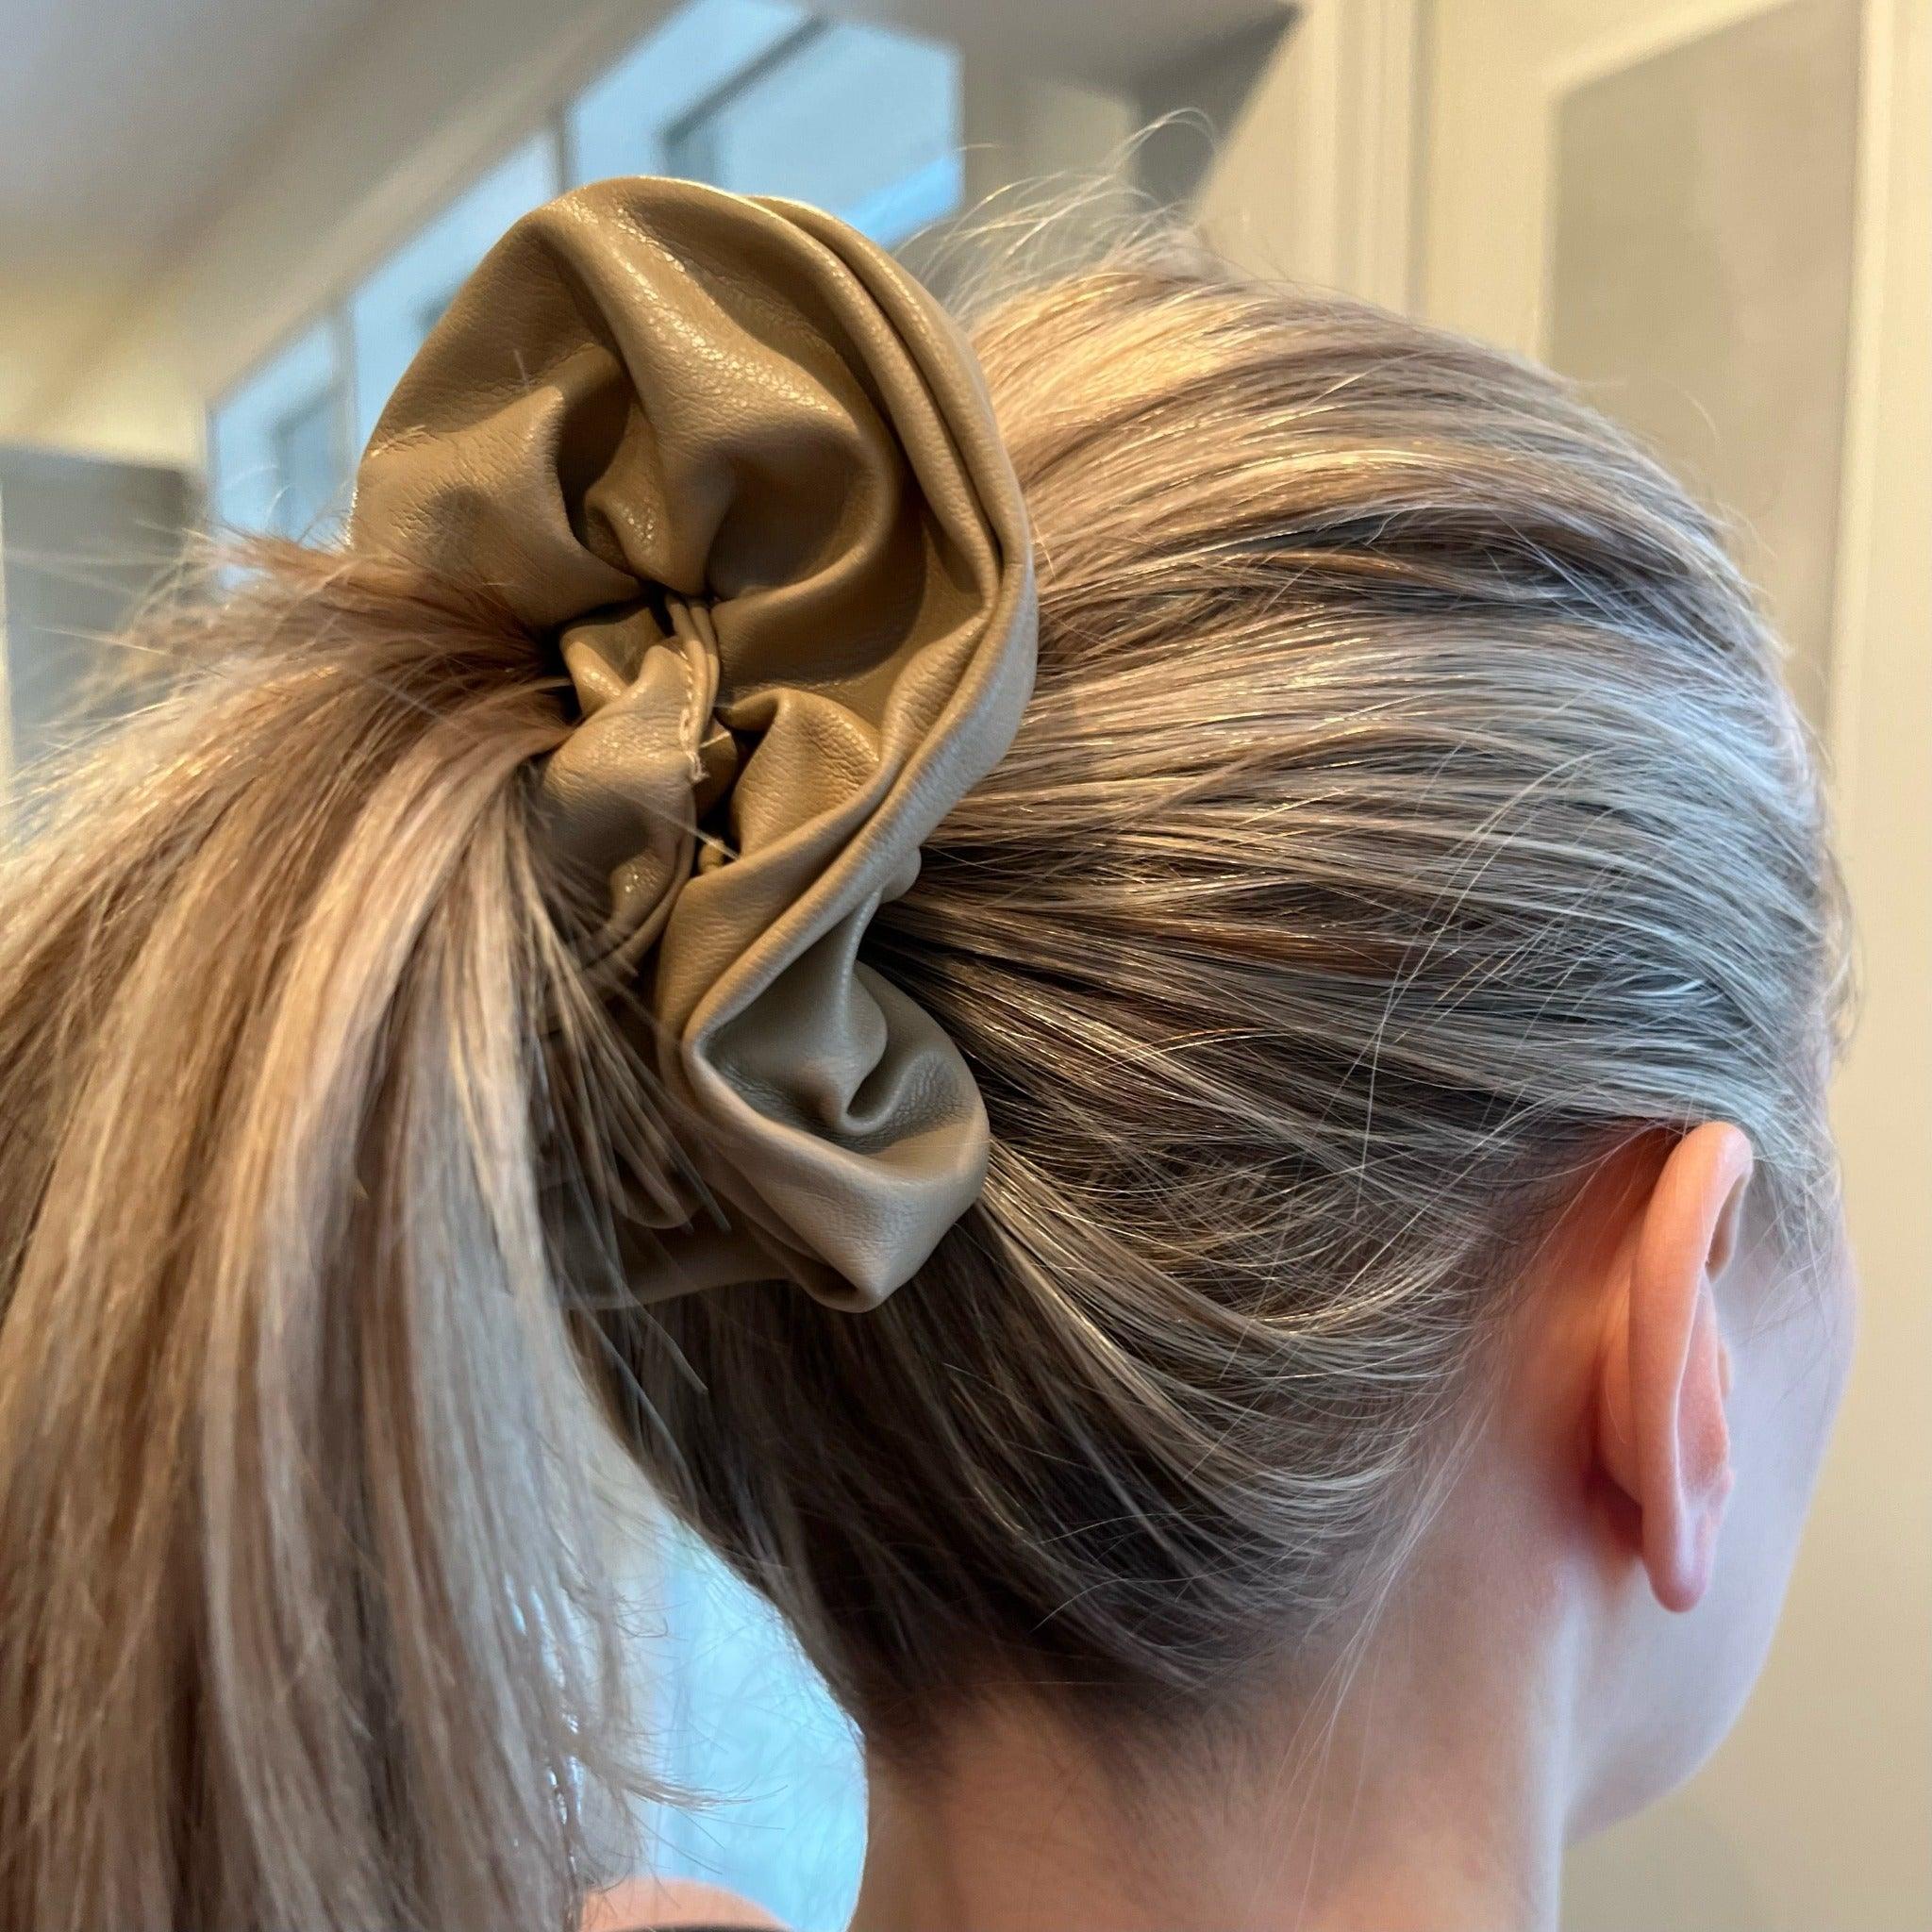 faux leather scrunchies faux leather hair scrunchies what glue do you use for faux leather best material for making scrunchies what is the best fabric to make scrunchies